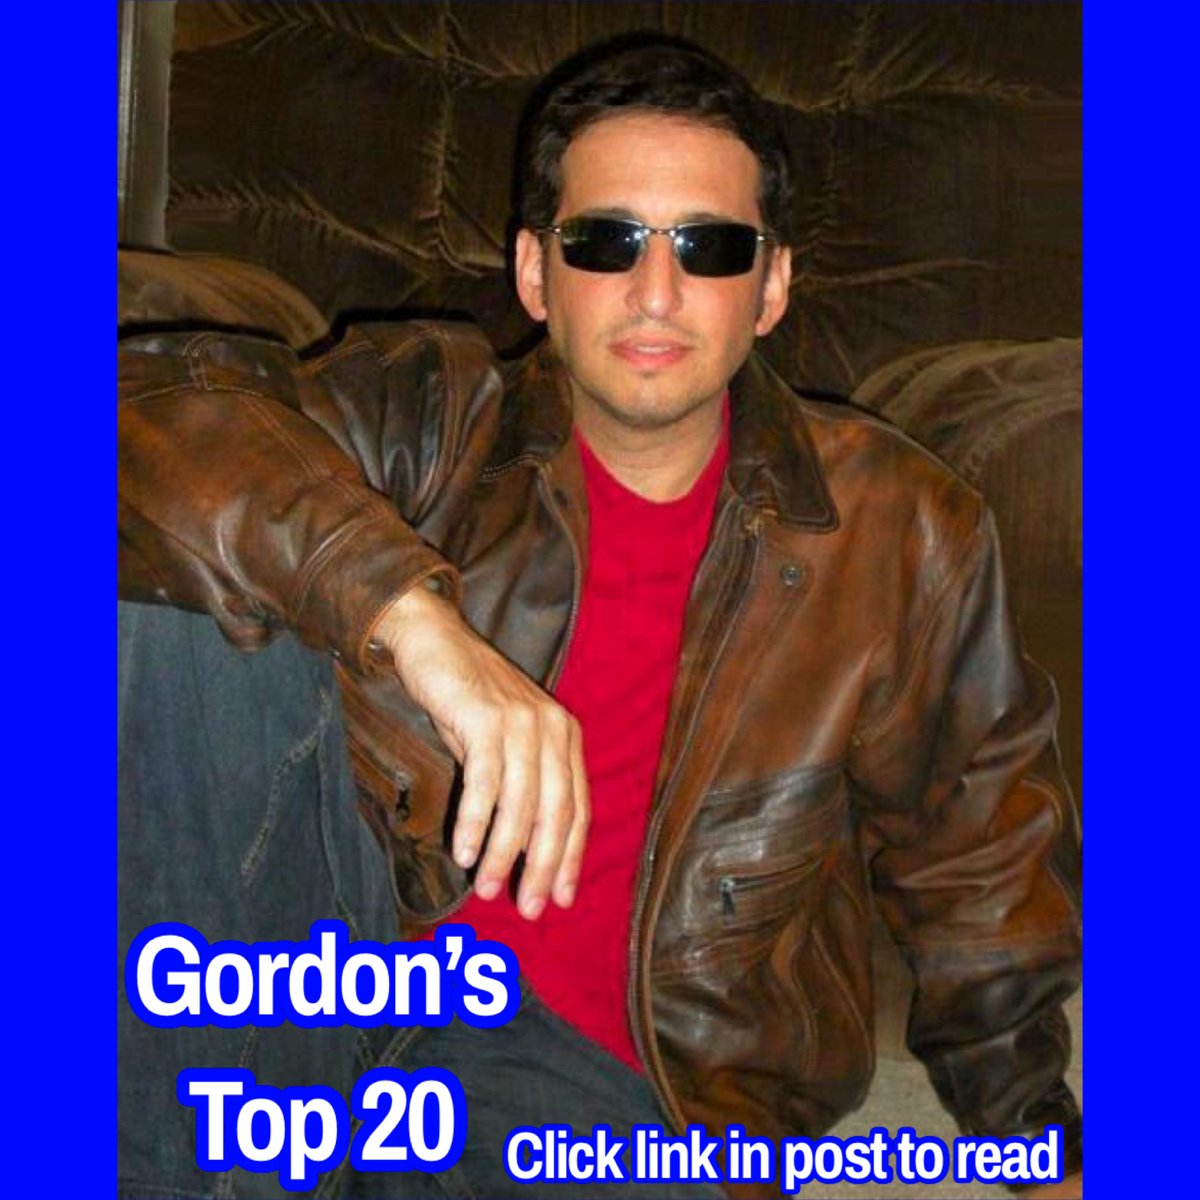 #CheckItOut 🖥️📱#Fan 🎶 #Top20 Here's another FABULOUS Laura Branigan Top 20 song list and commentary that I received from Gordon Pogoda. Such a great read! Thanks so much for sharing, Gordon!  🙂❤️

If anyone else would like to compile your own TOP 20 song list and commentary…